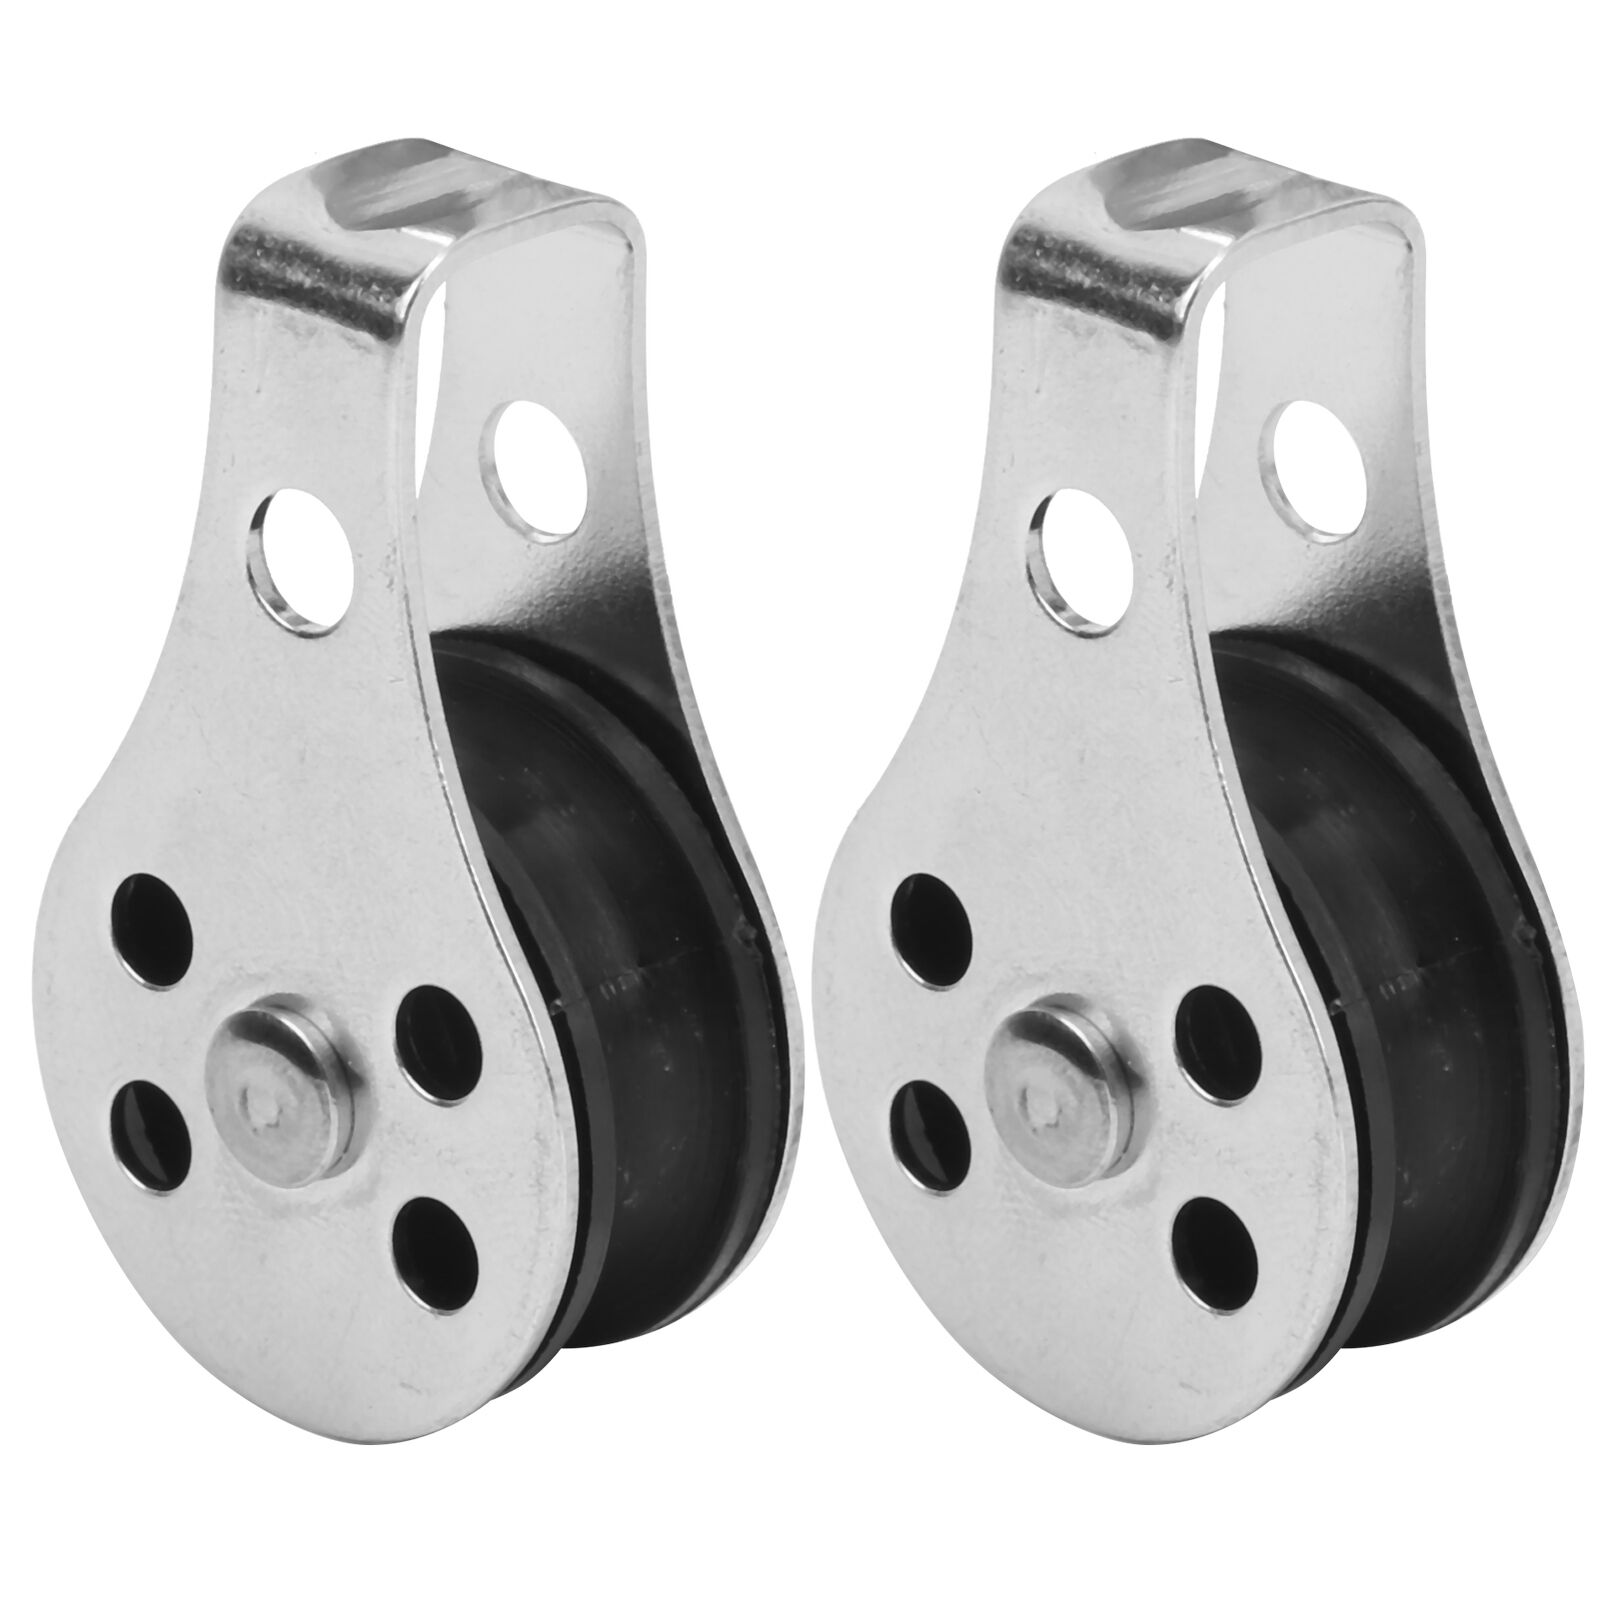 Evonecy Pulley 2Pcs Marine Pulley Waterproof Small Lifting For Wire Rope New